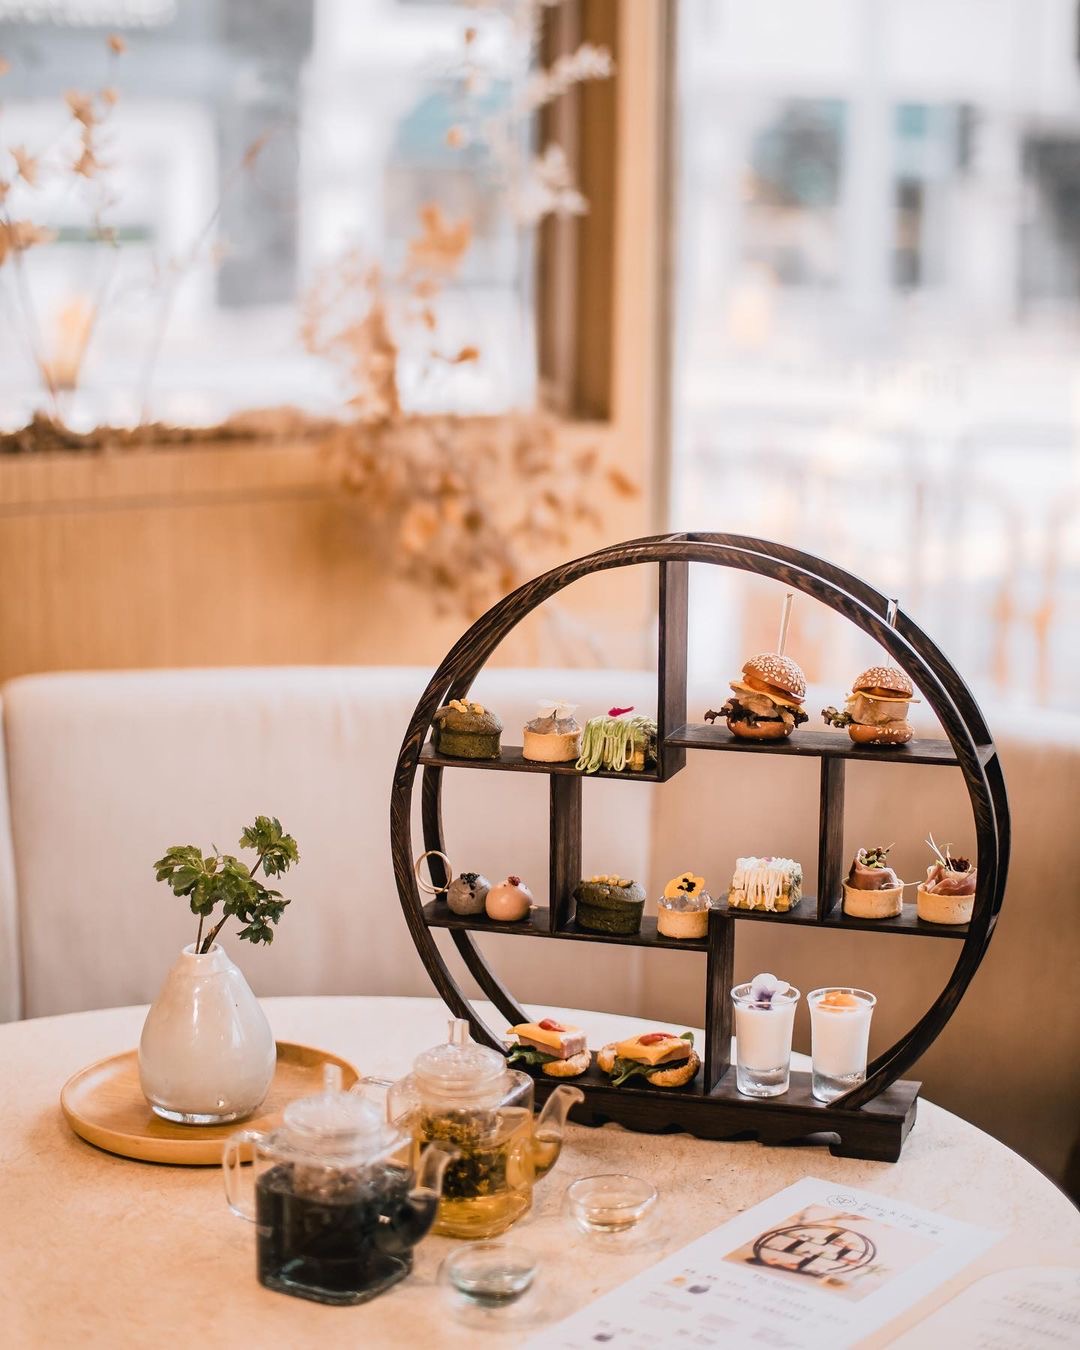 <p>Enjoy an elegant afternoon tea experience in a stylish floral-themed tearoom.</p>
